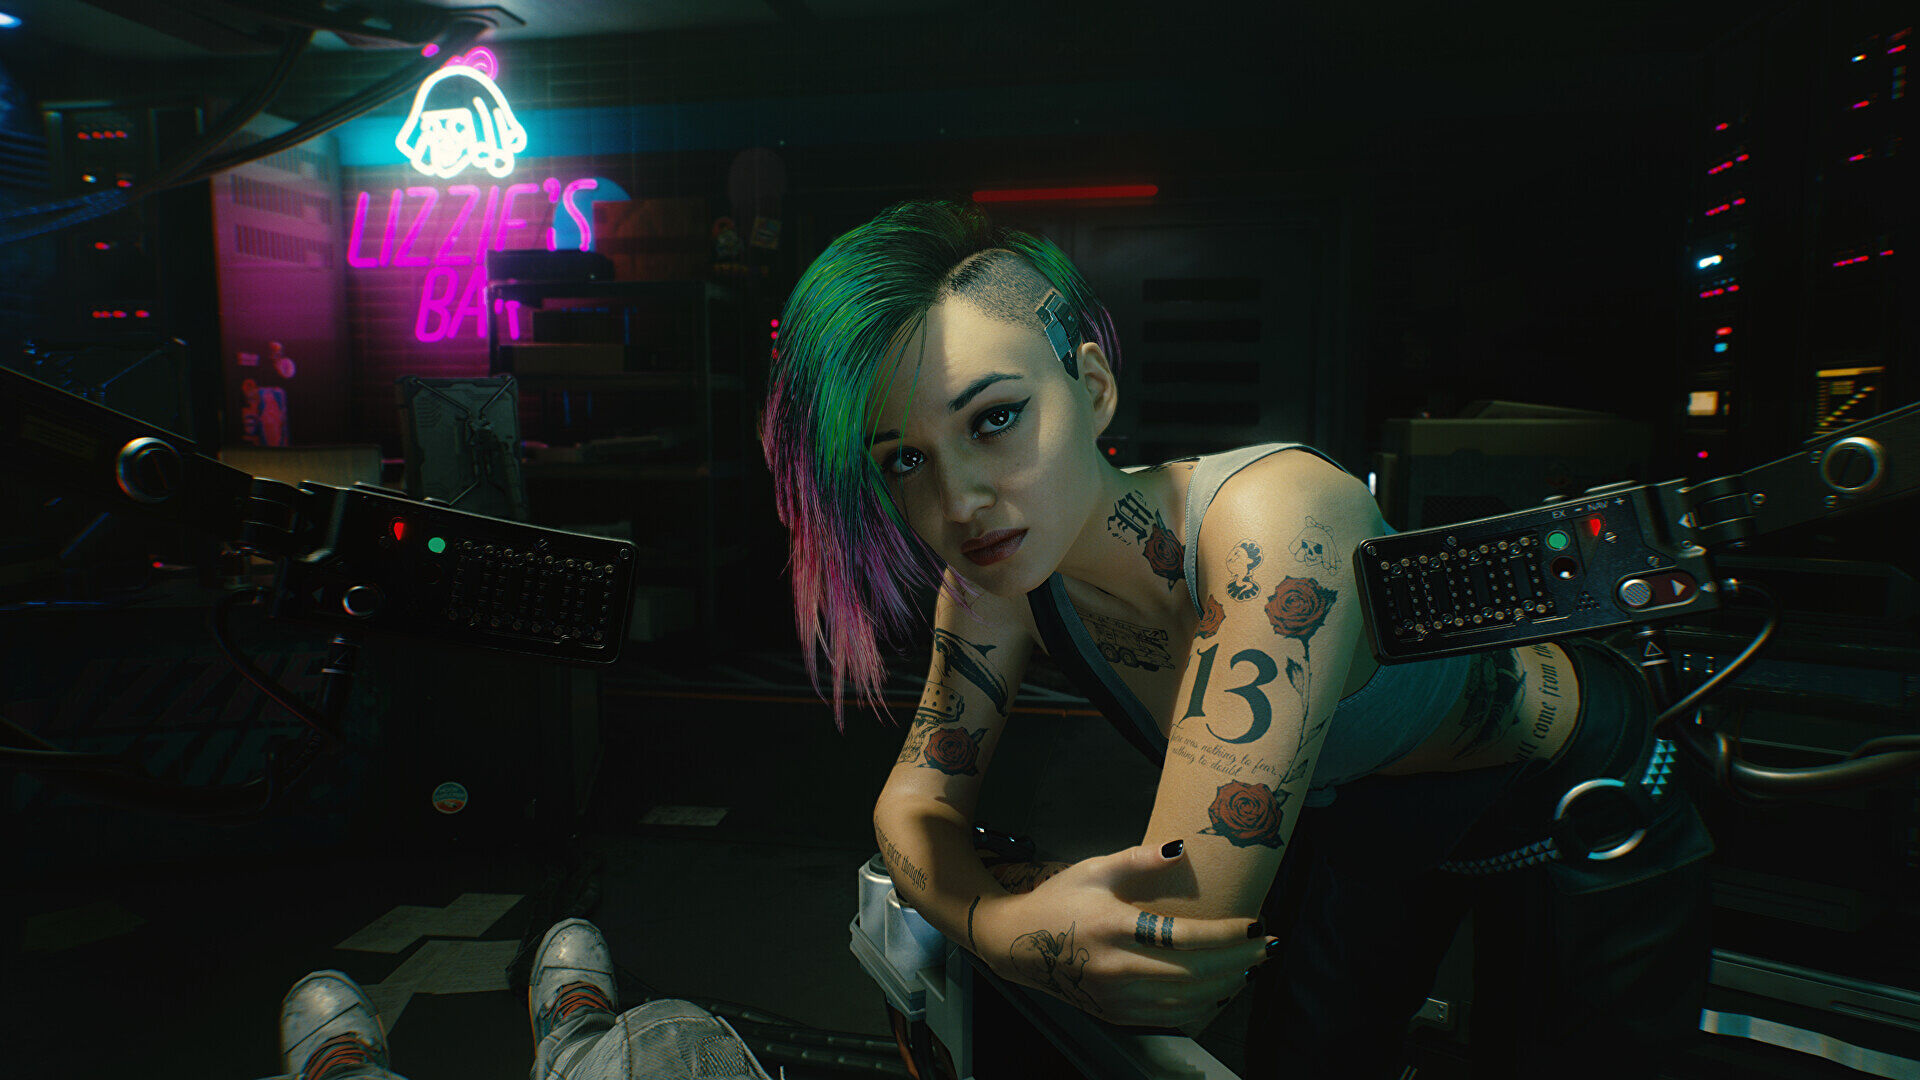 CD Projekt Red are making a new Witcher trilogy, Cyberpunk 2077 sequel, and a brand new IP